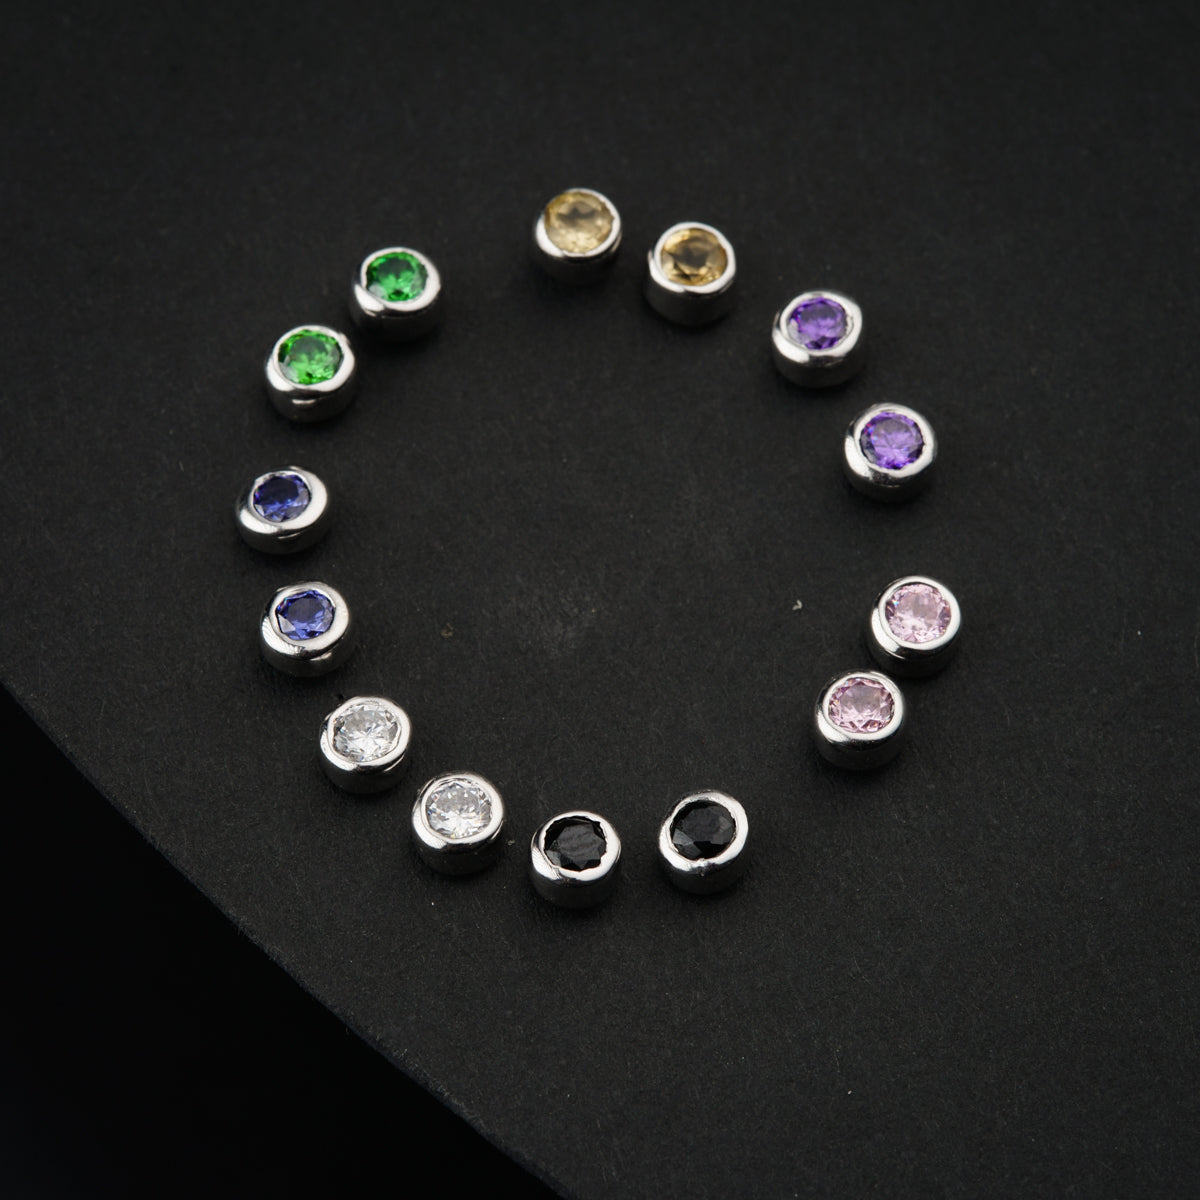 a group of different colored stones arranged in a circle